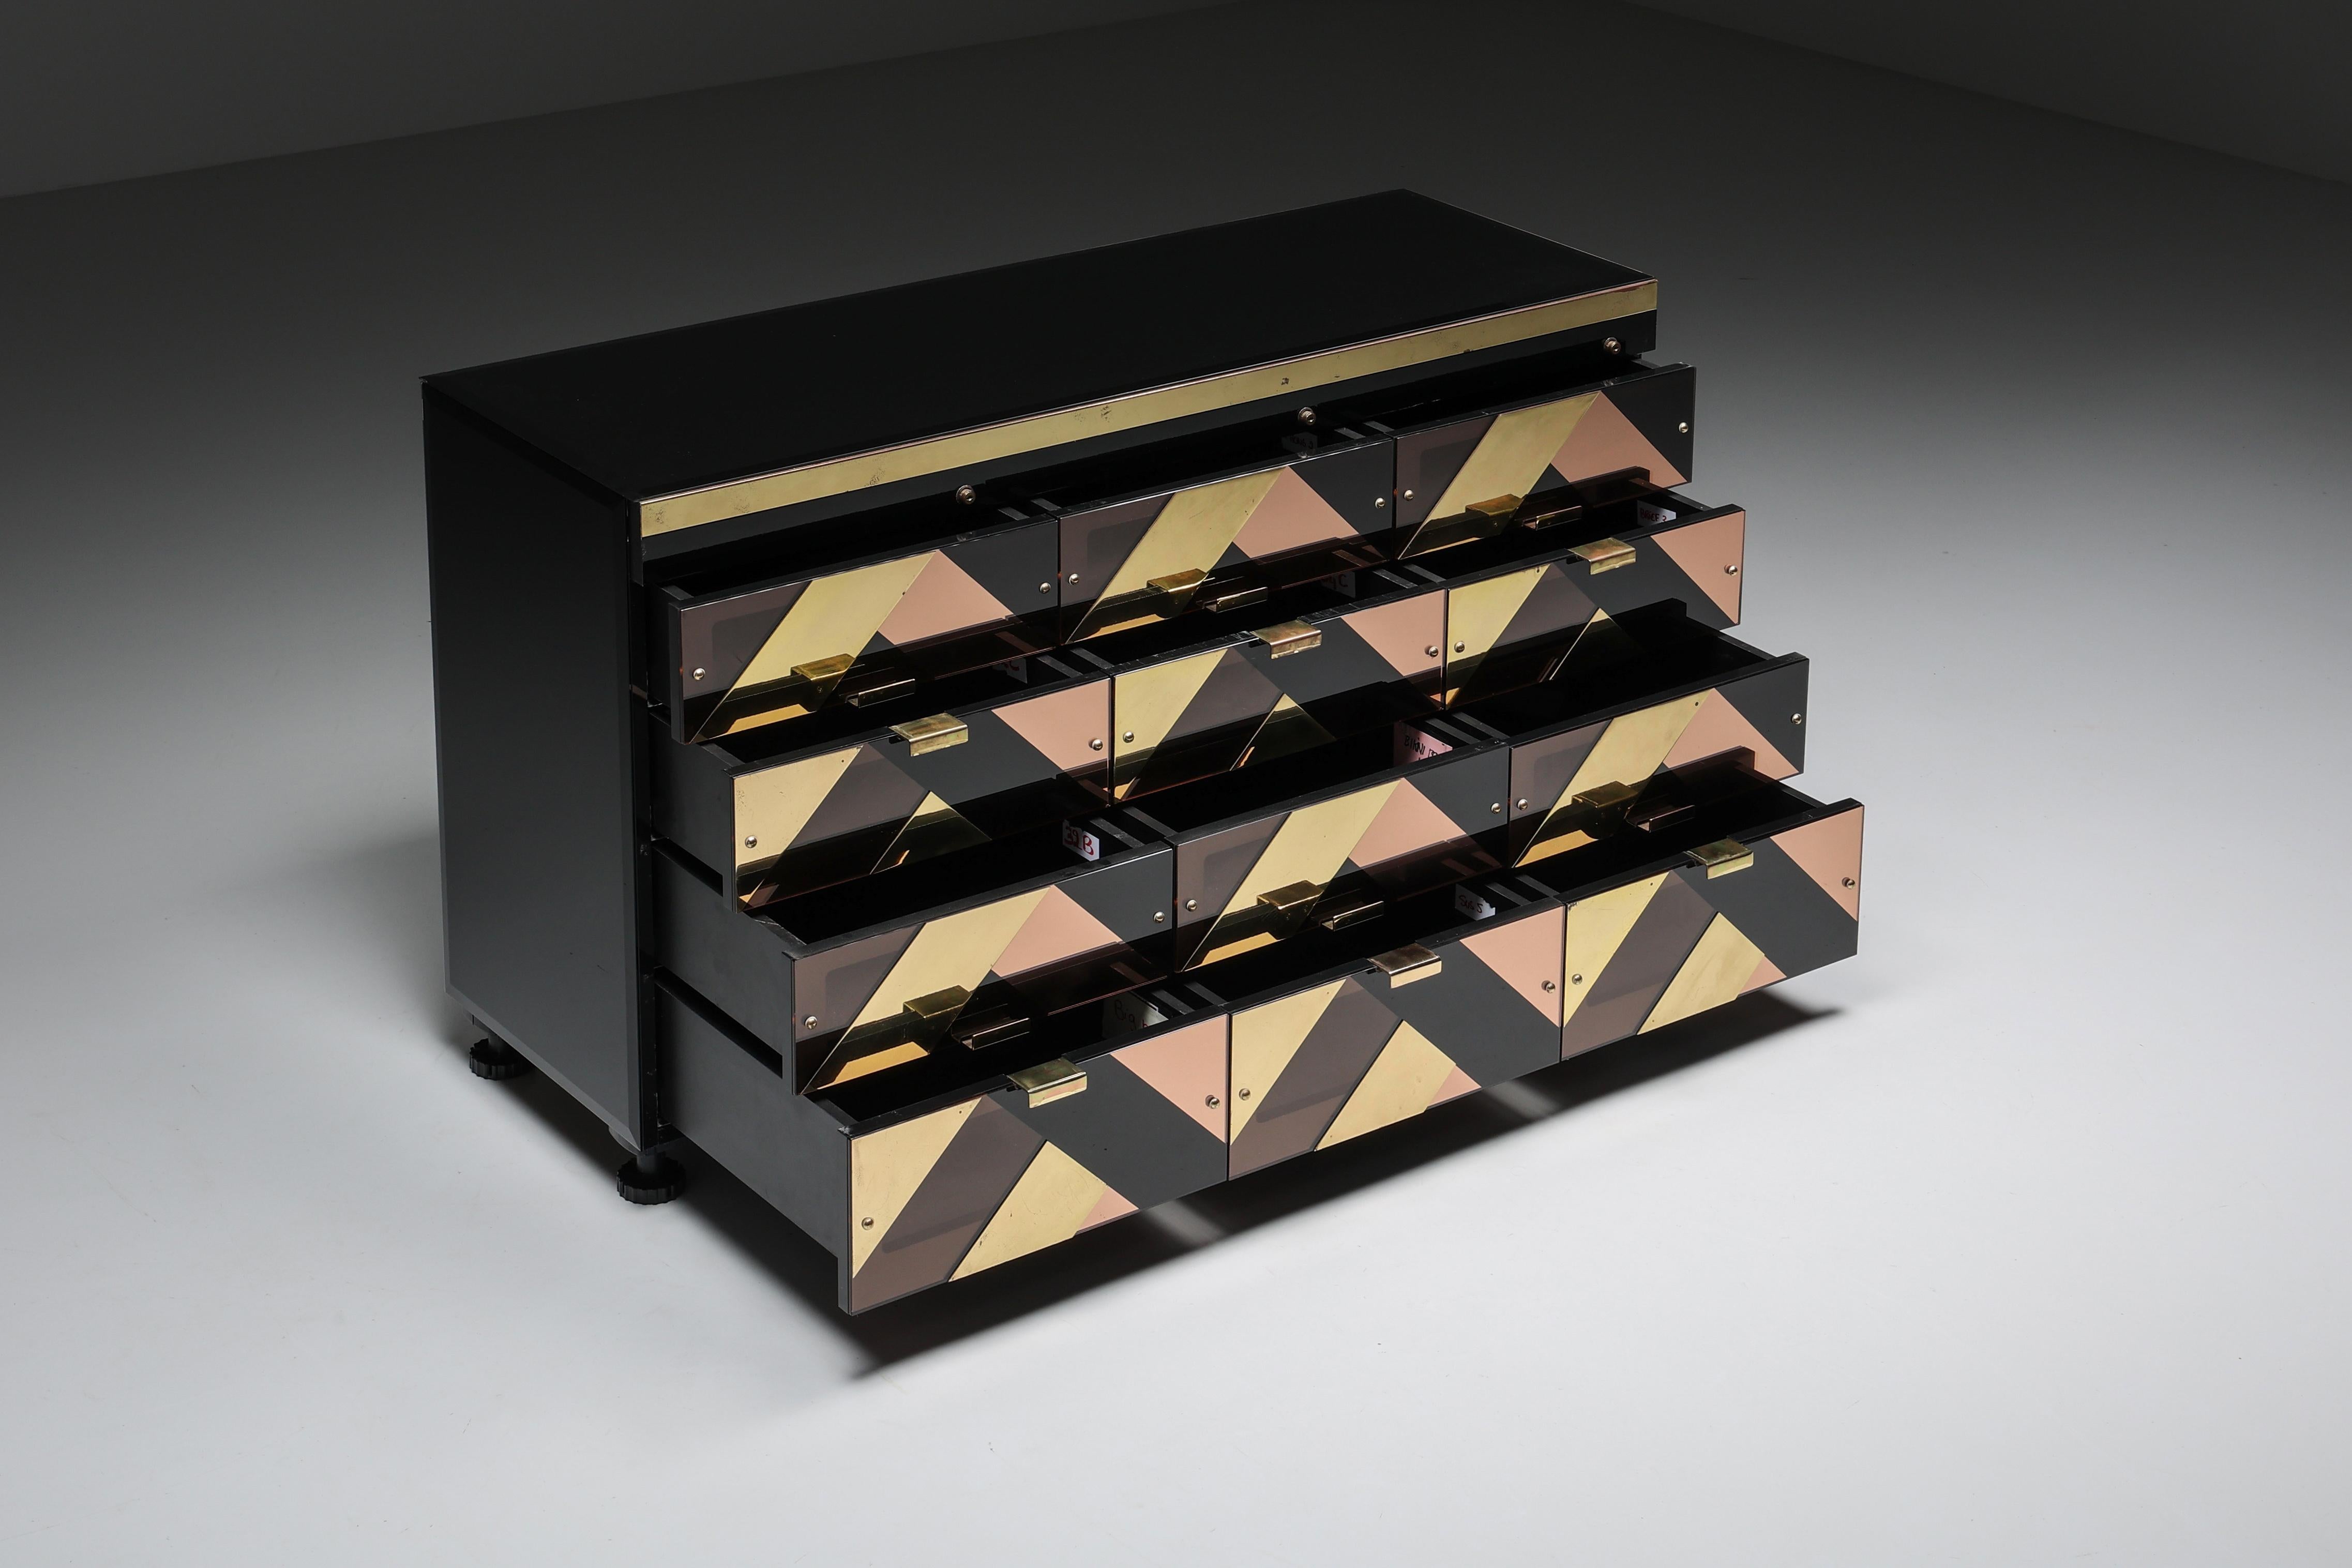 Brass; Smoked Perspex; Black Glass; Drawers; Credenza; Italian Design; Italy; Hollywood Regency; Black & Gold; Sideboard; 

This credenza, a 12-drawer high-end storage piece, is custom-made. Black hyalith glass sides and top. The drawers' fronts are